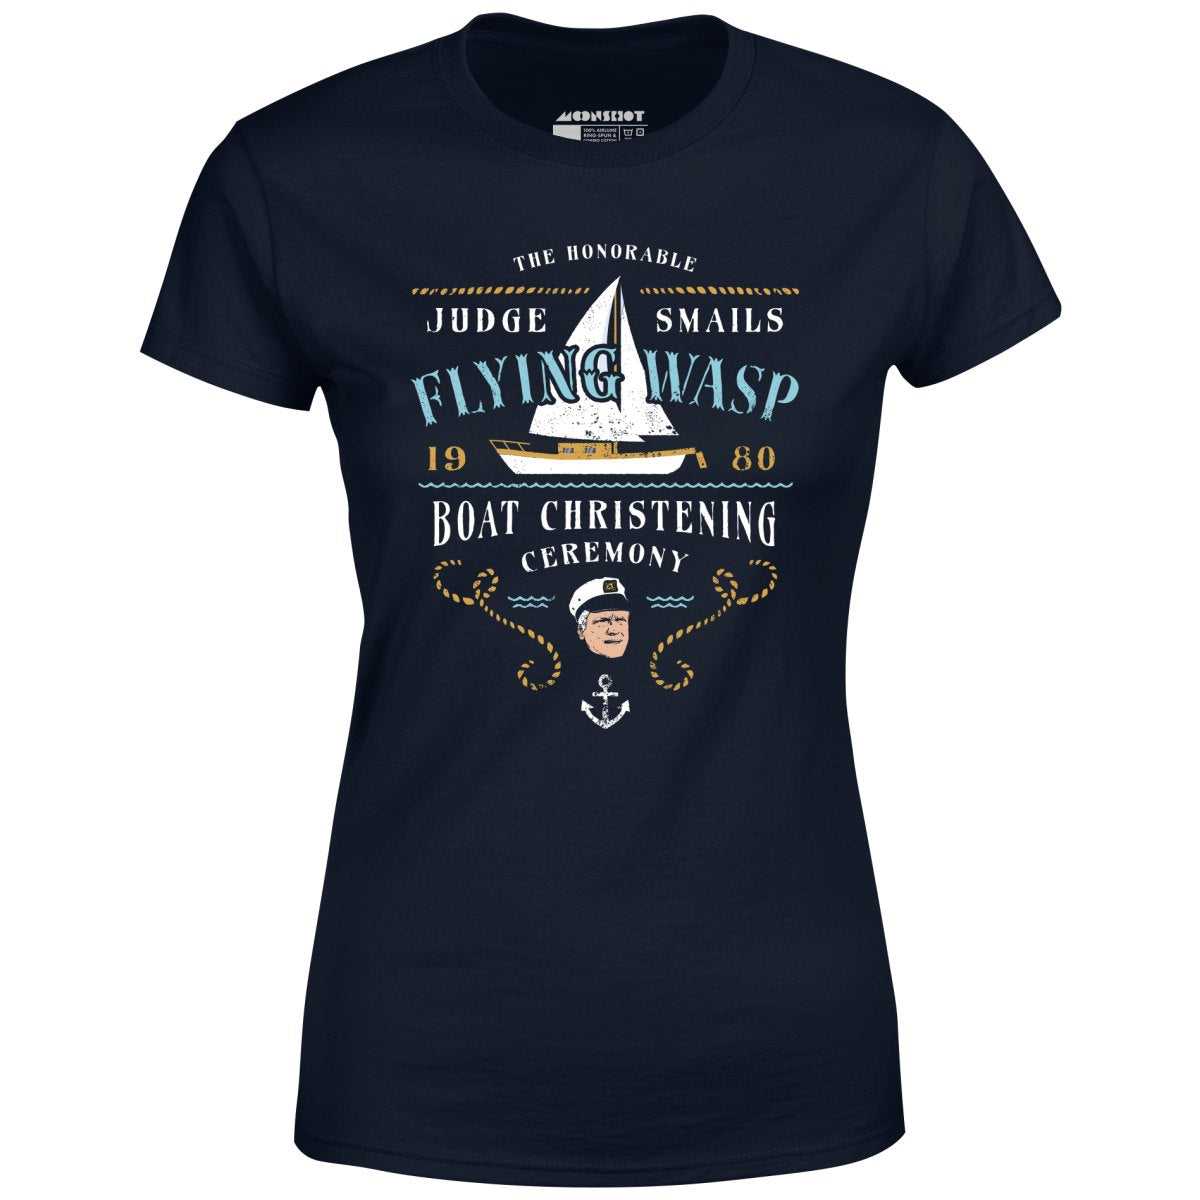 Judge Smails - Flying Wasp Boat Christening Ceremony - Women's T-Shirt